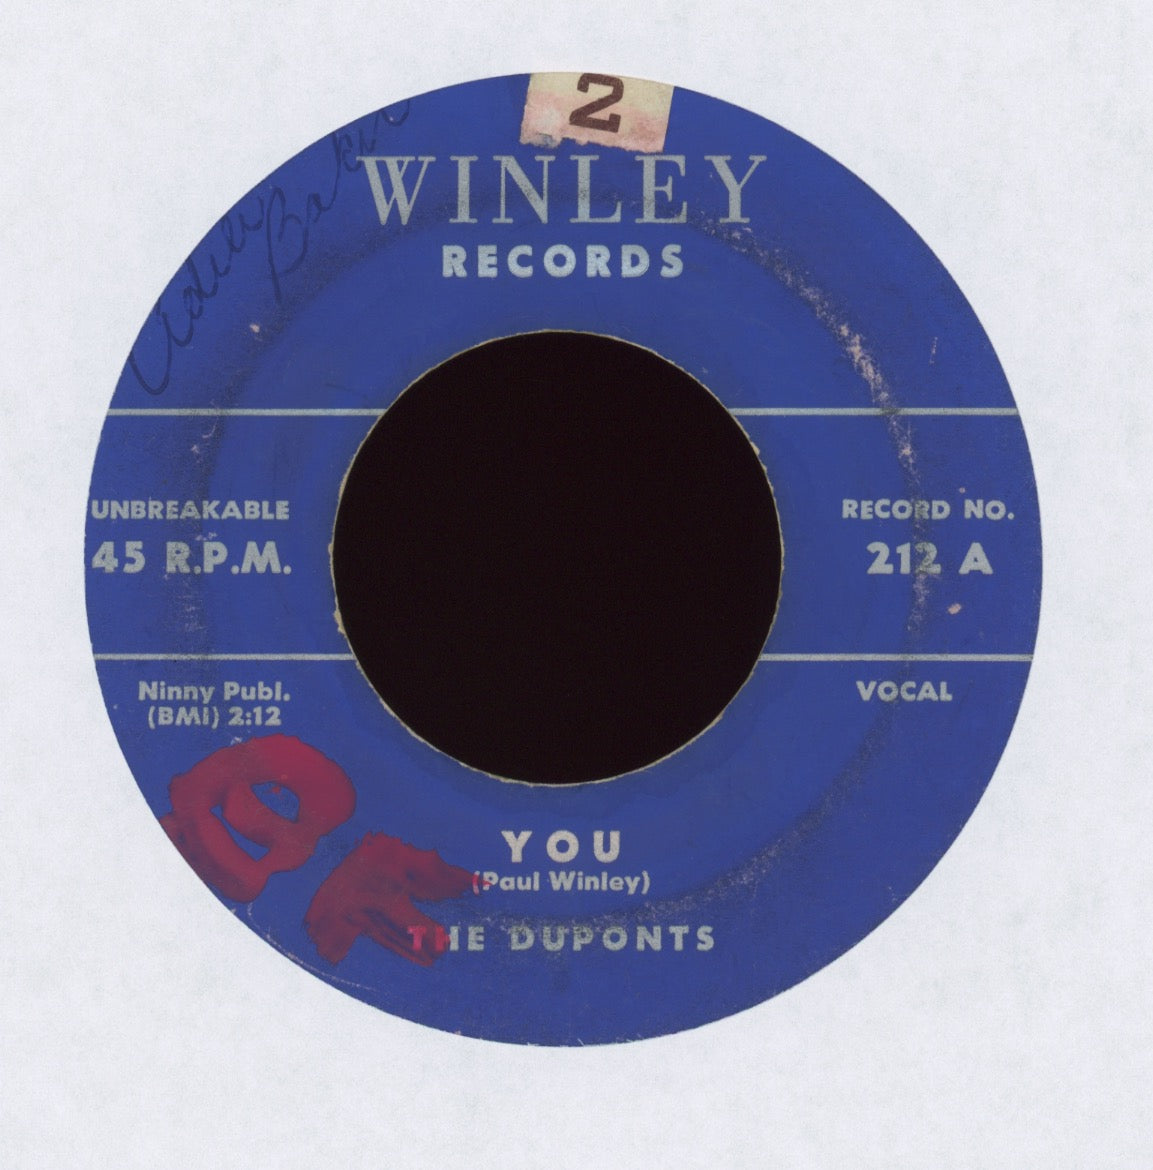 The Duponts - You / Must Be Falling In Love on Winley